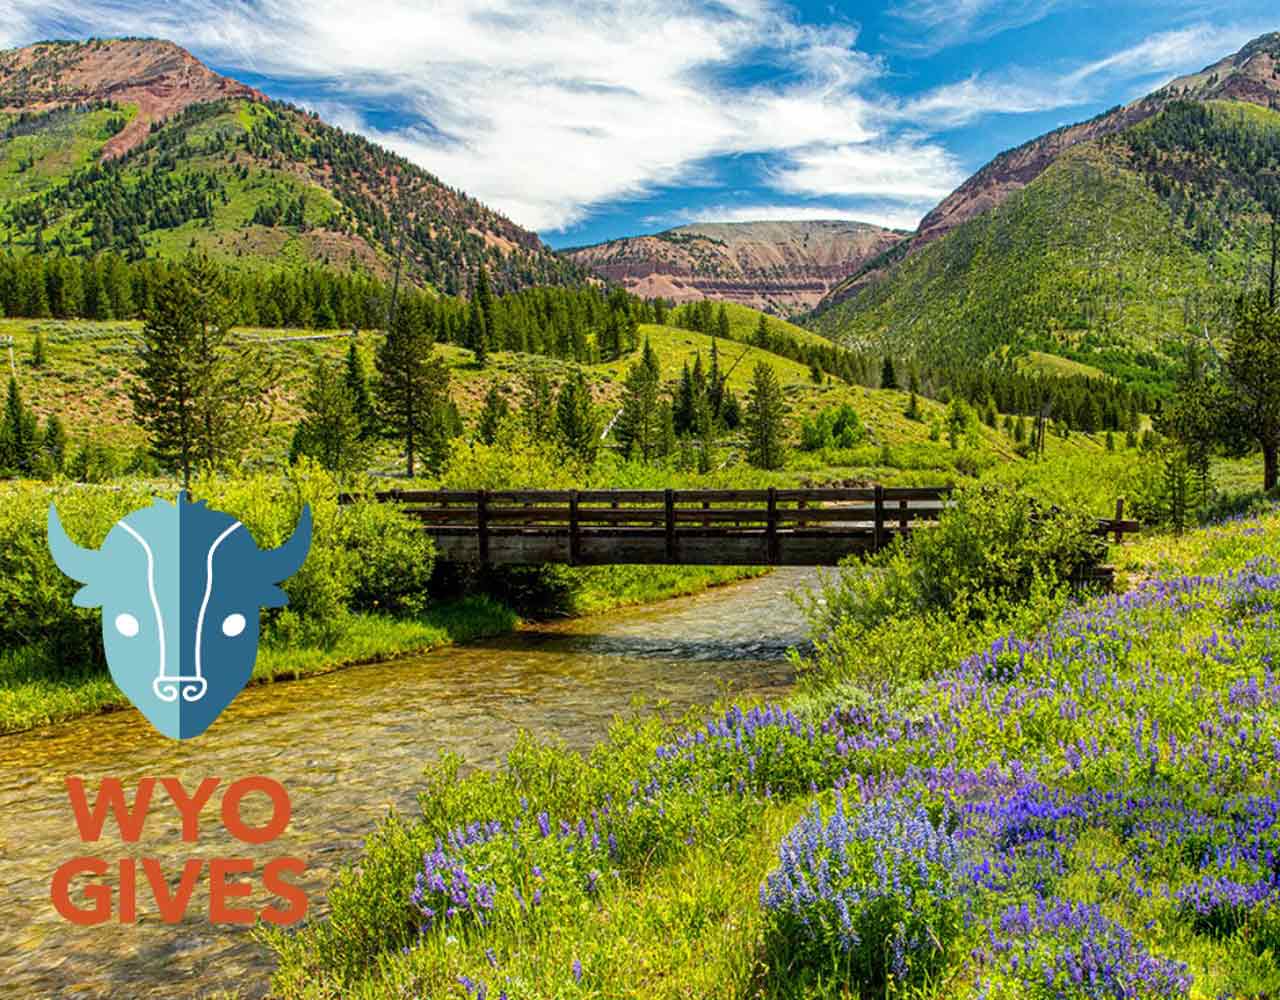 Wyogives logo on scenery picture of Wyoming